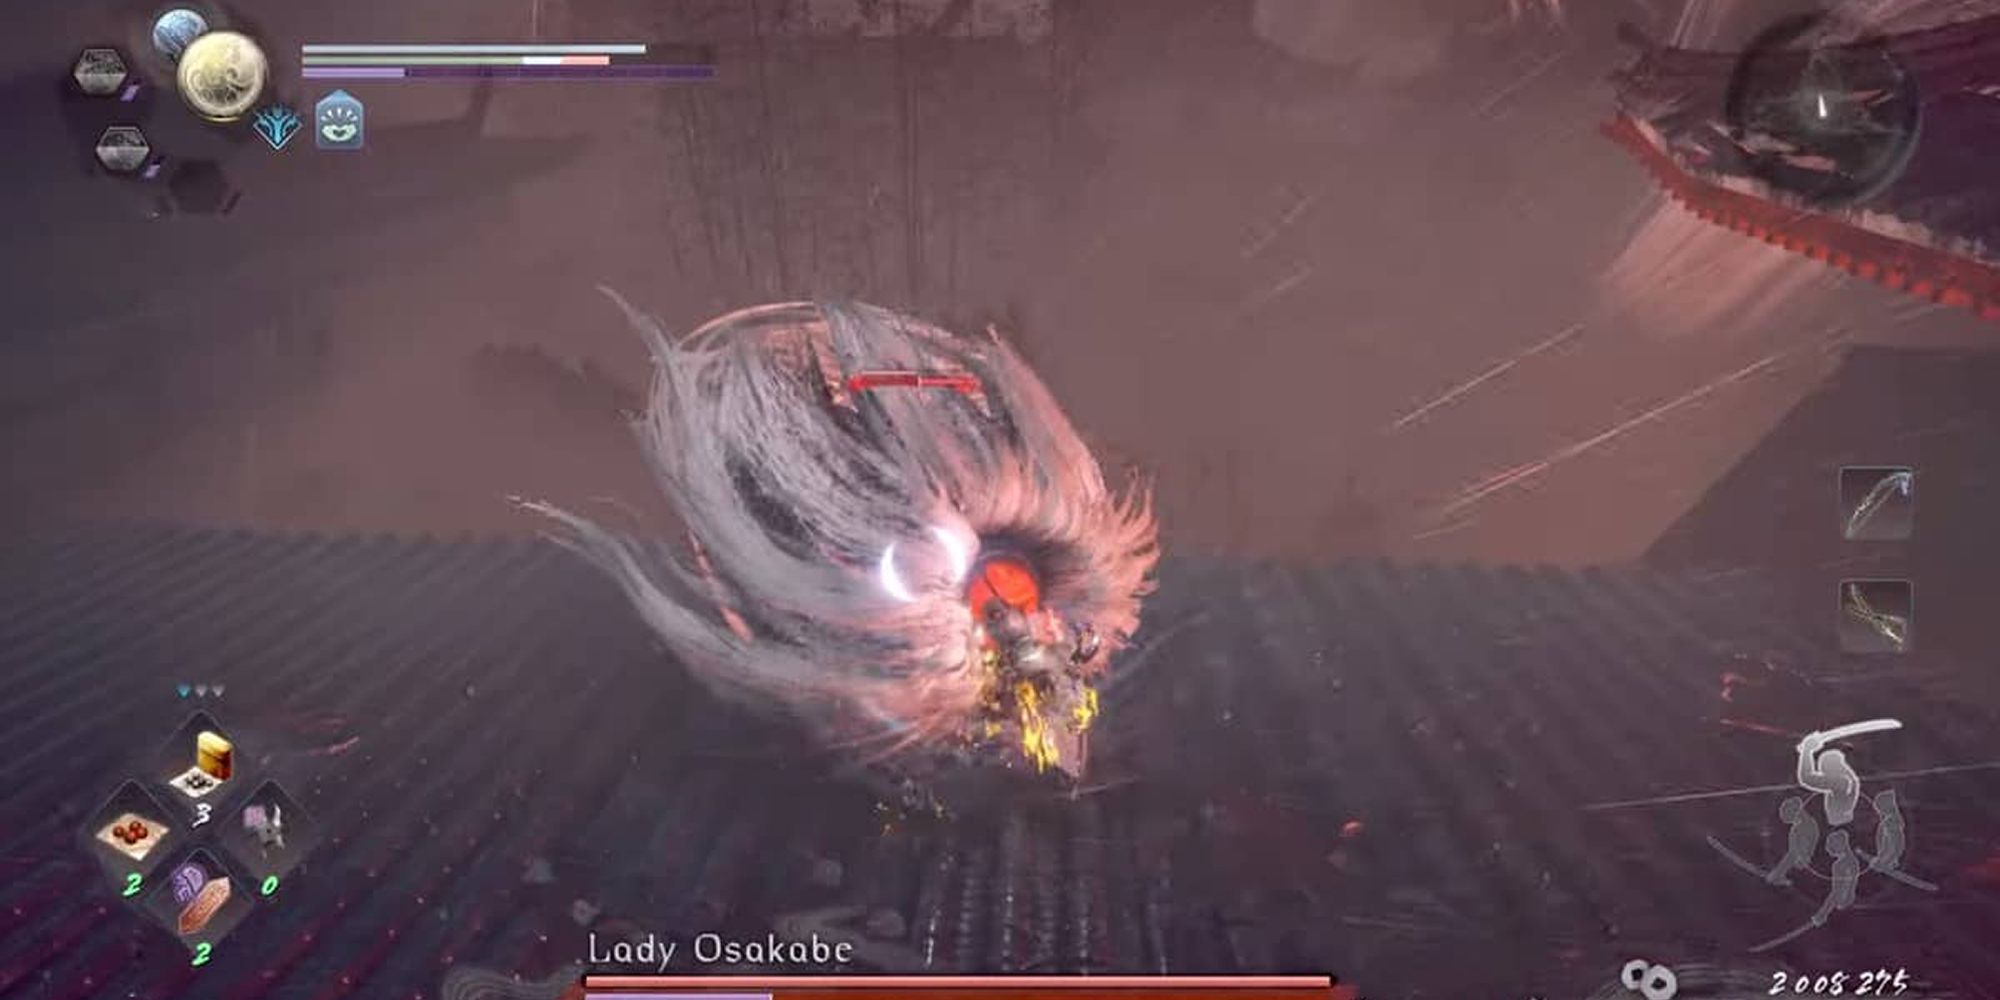 Attacking One Of Osakabe's Body Parts